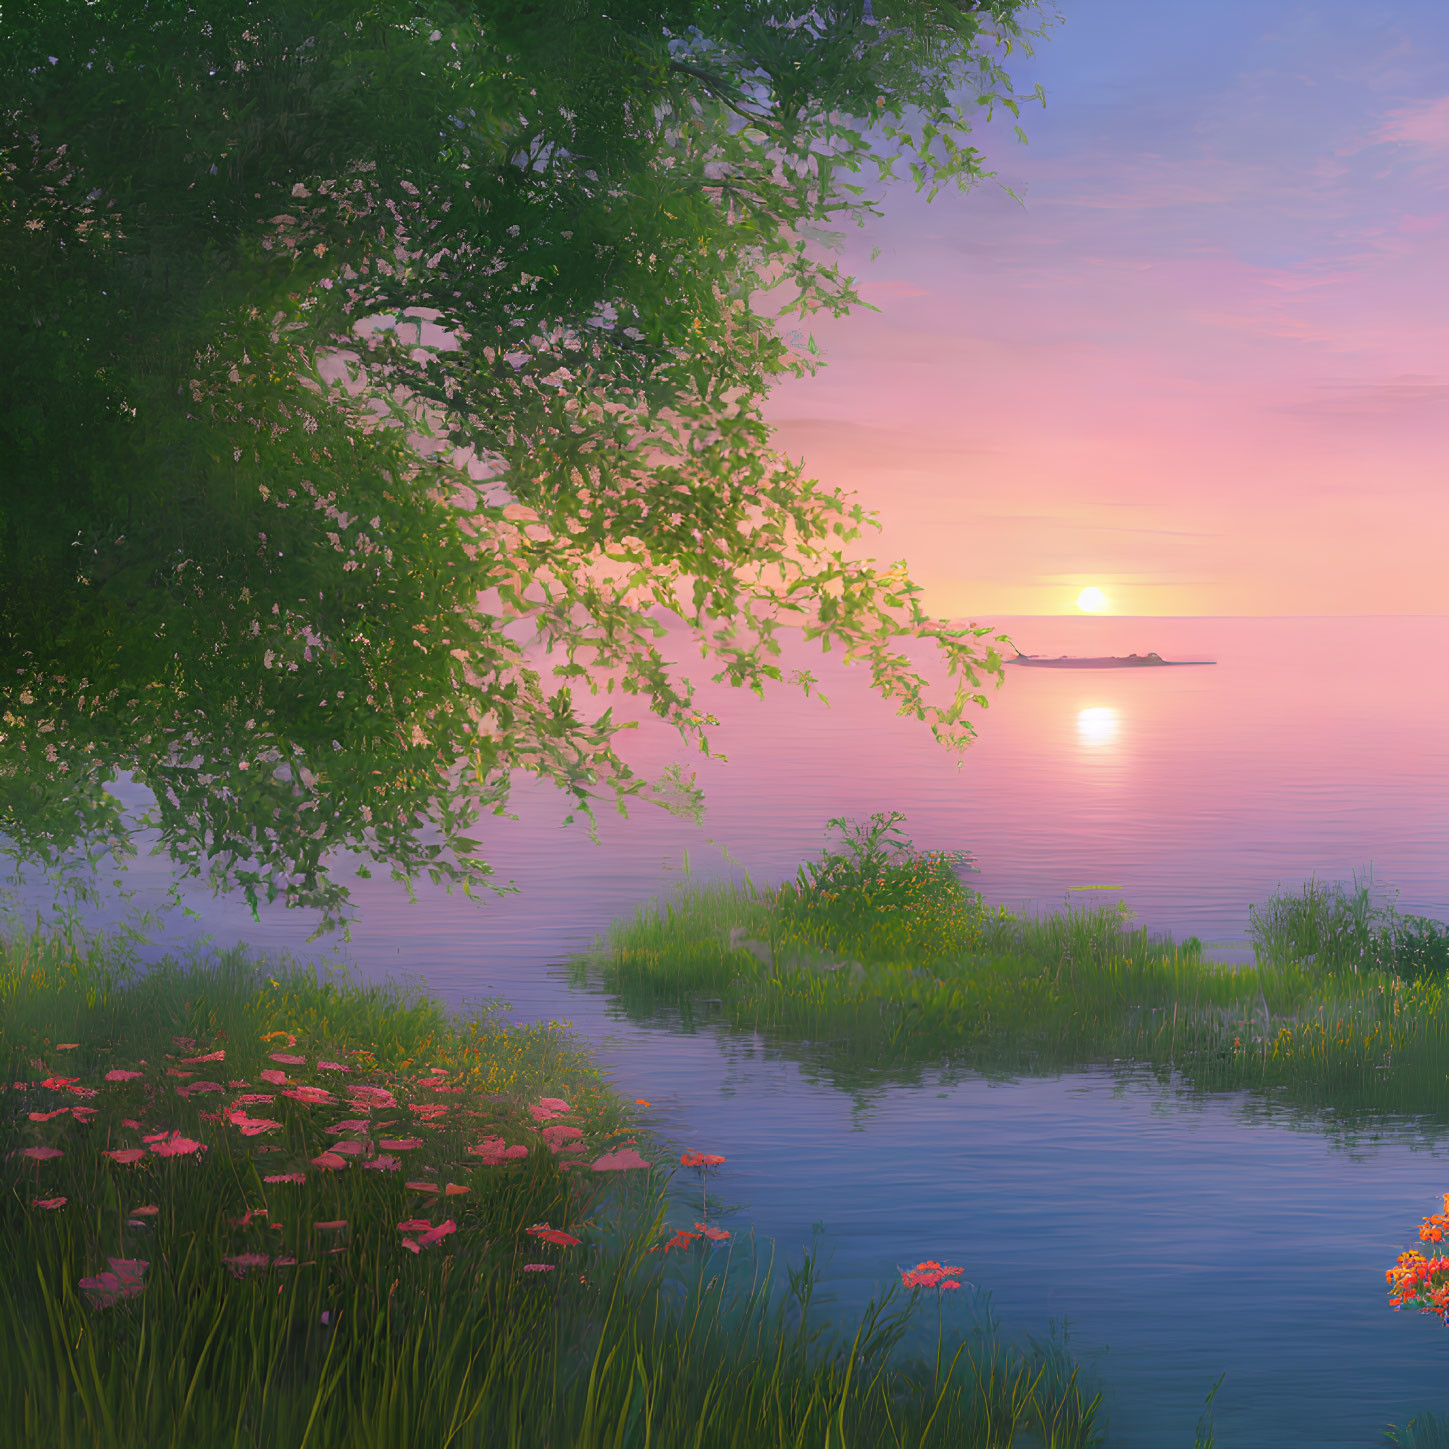 Tranquil sunset scene with pink flowers, lush greenery, and overhanging tree branches